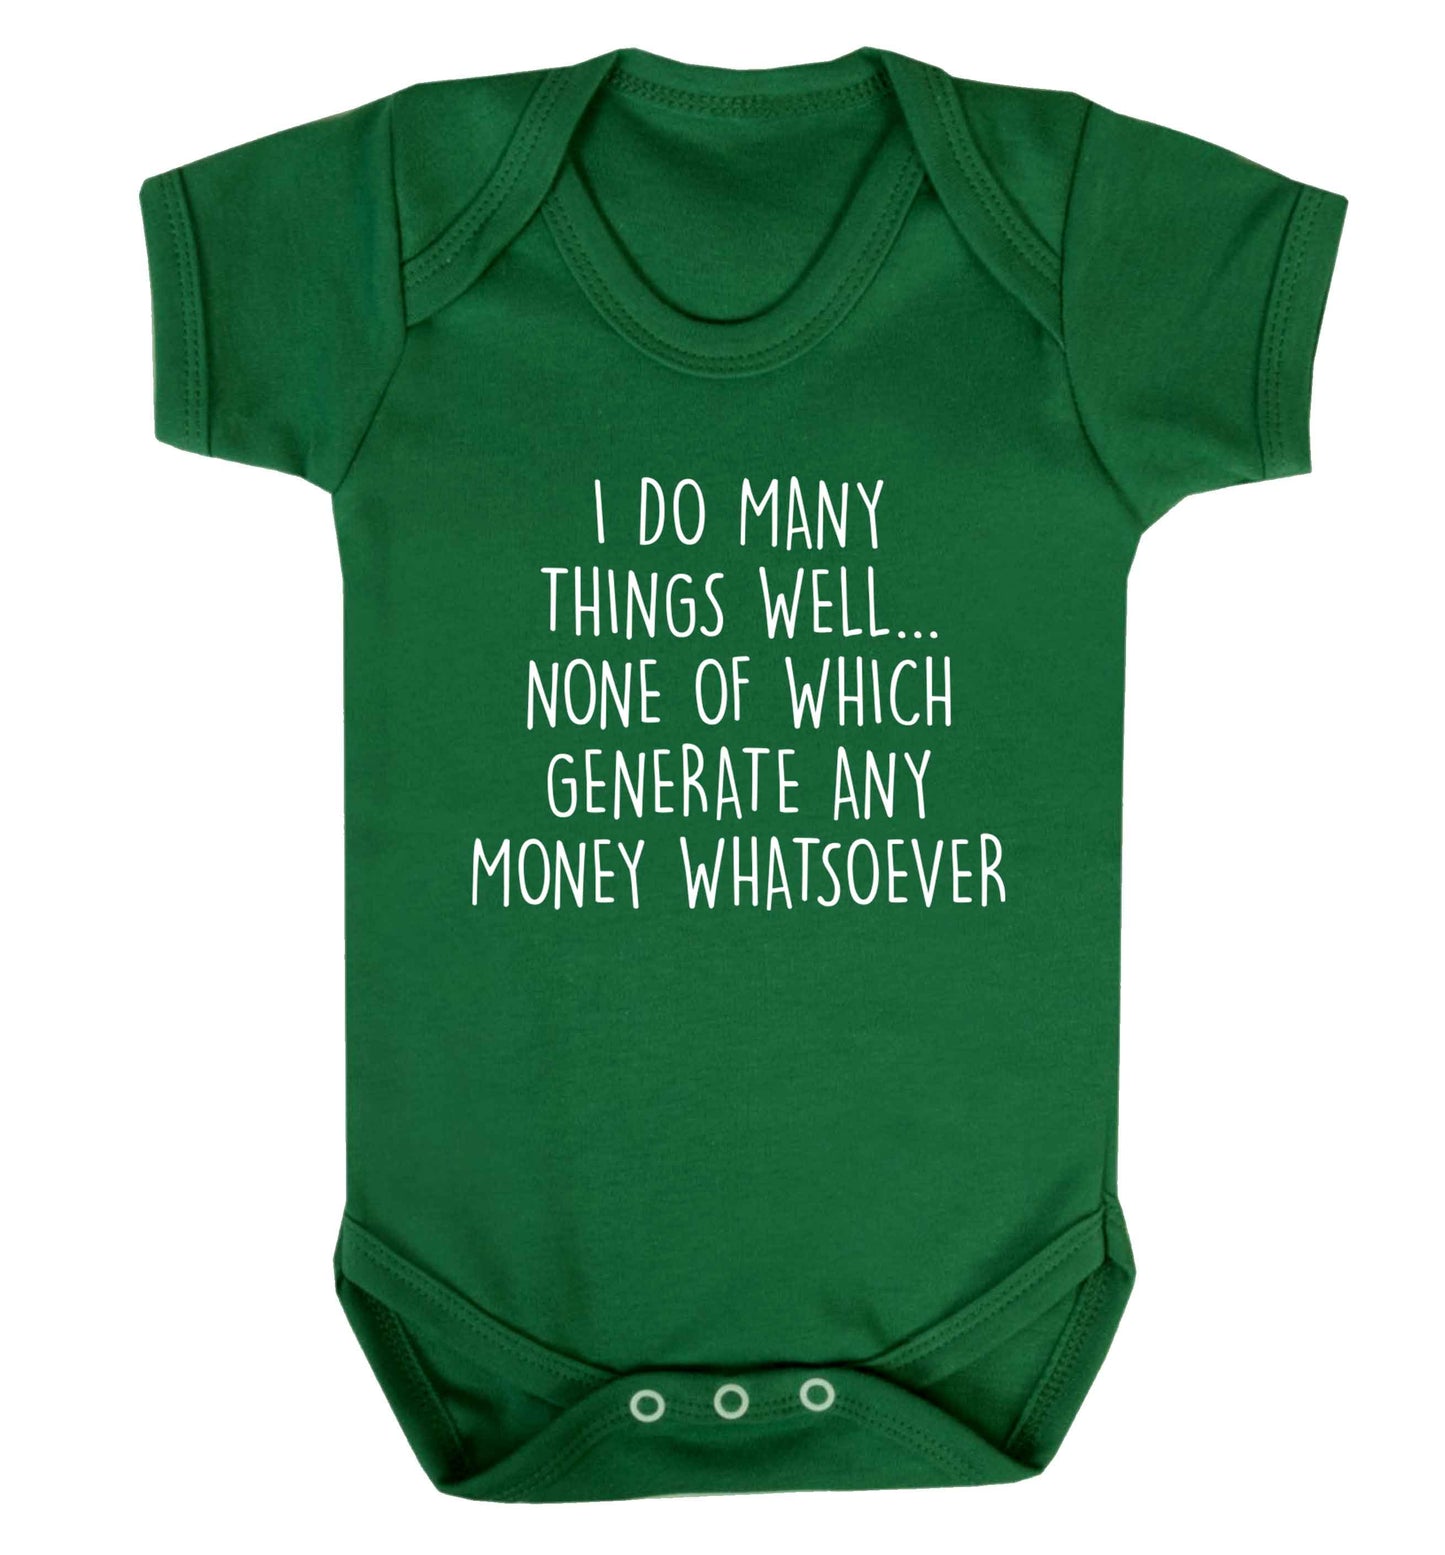 I do many things well none of which generate income Baby Vest green 18-24 months